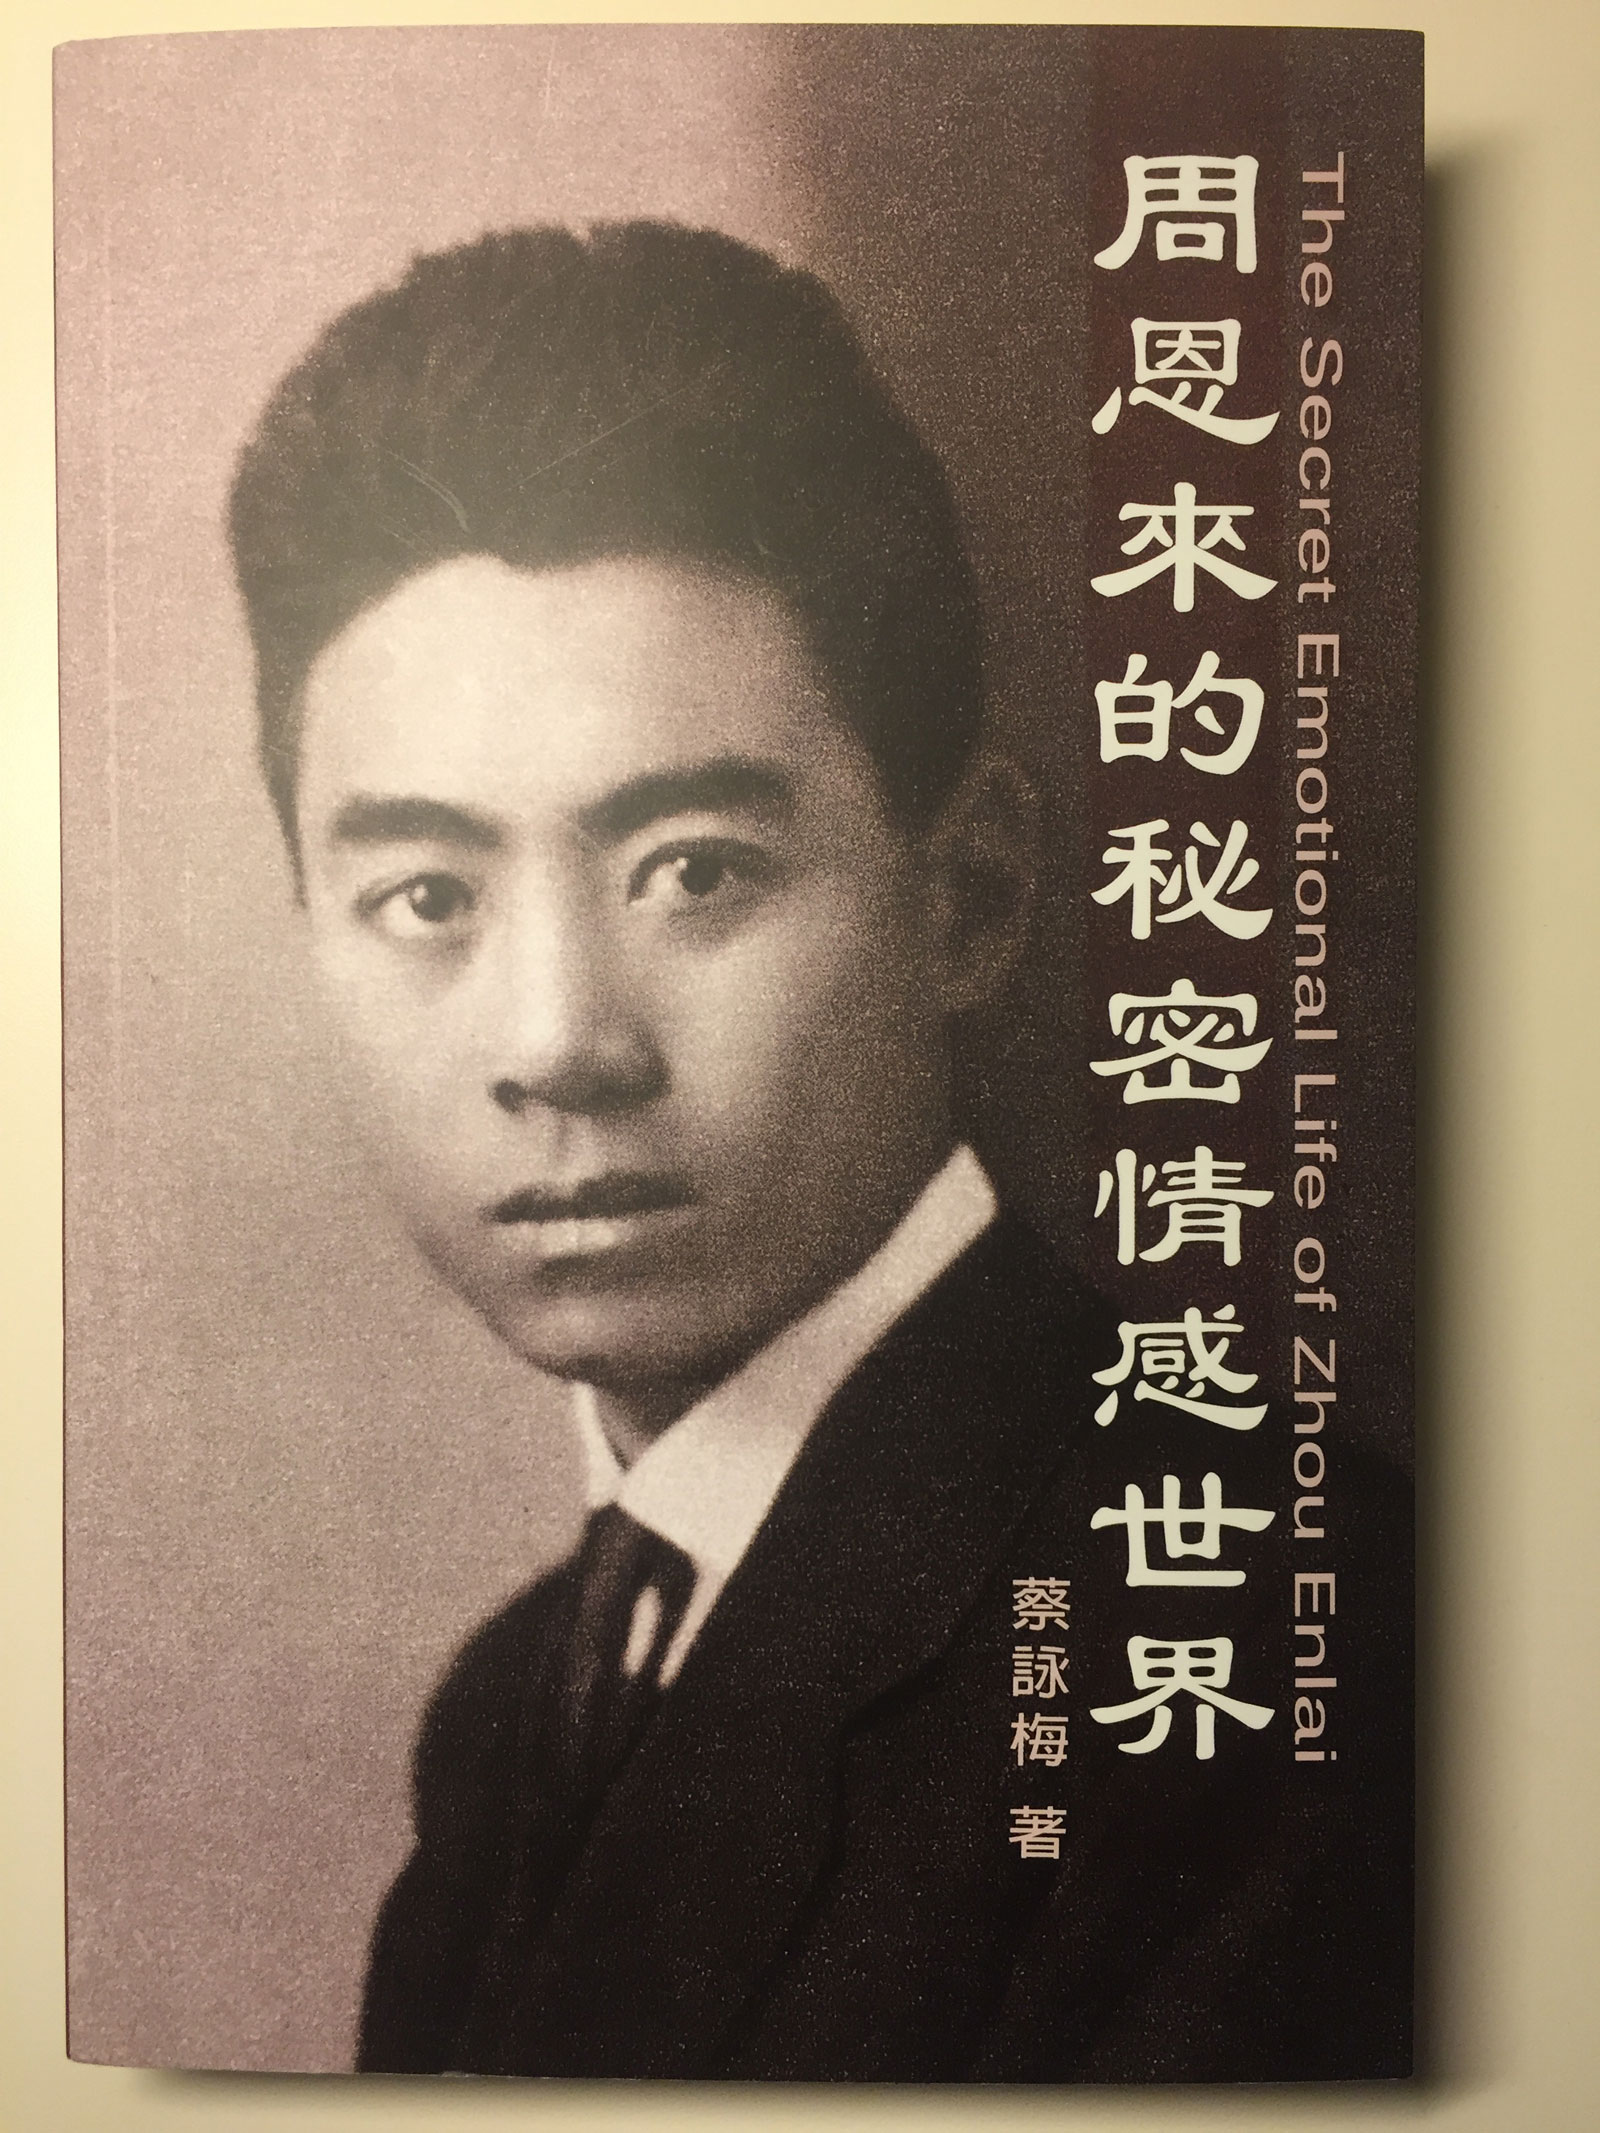 The cover of The Secret Emotional Life of Zhou Enlai, published by Bao's New Century Press